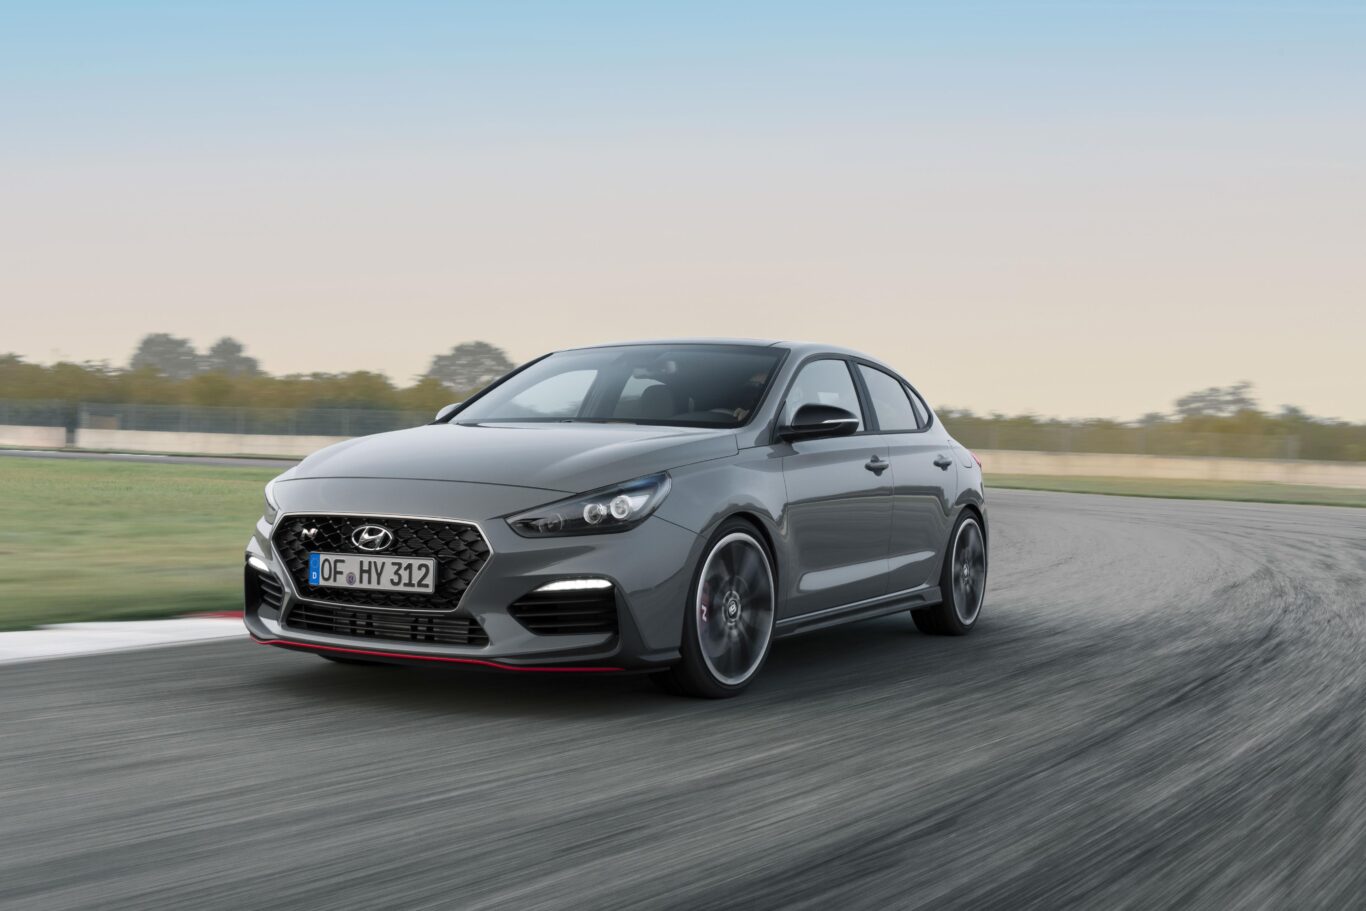 Hyundai's i30N Fastback combines pace and practicality